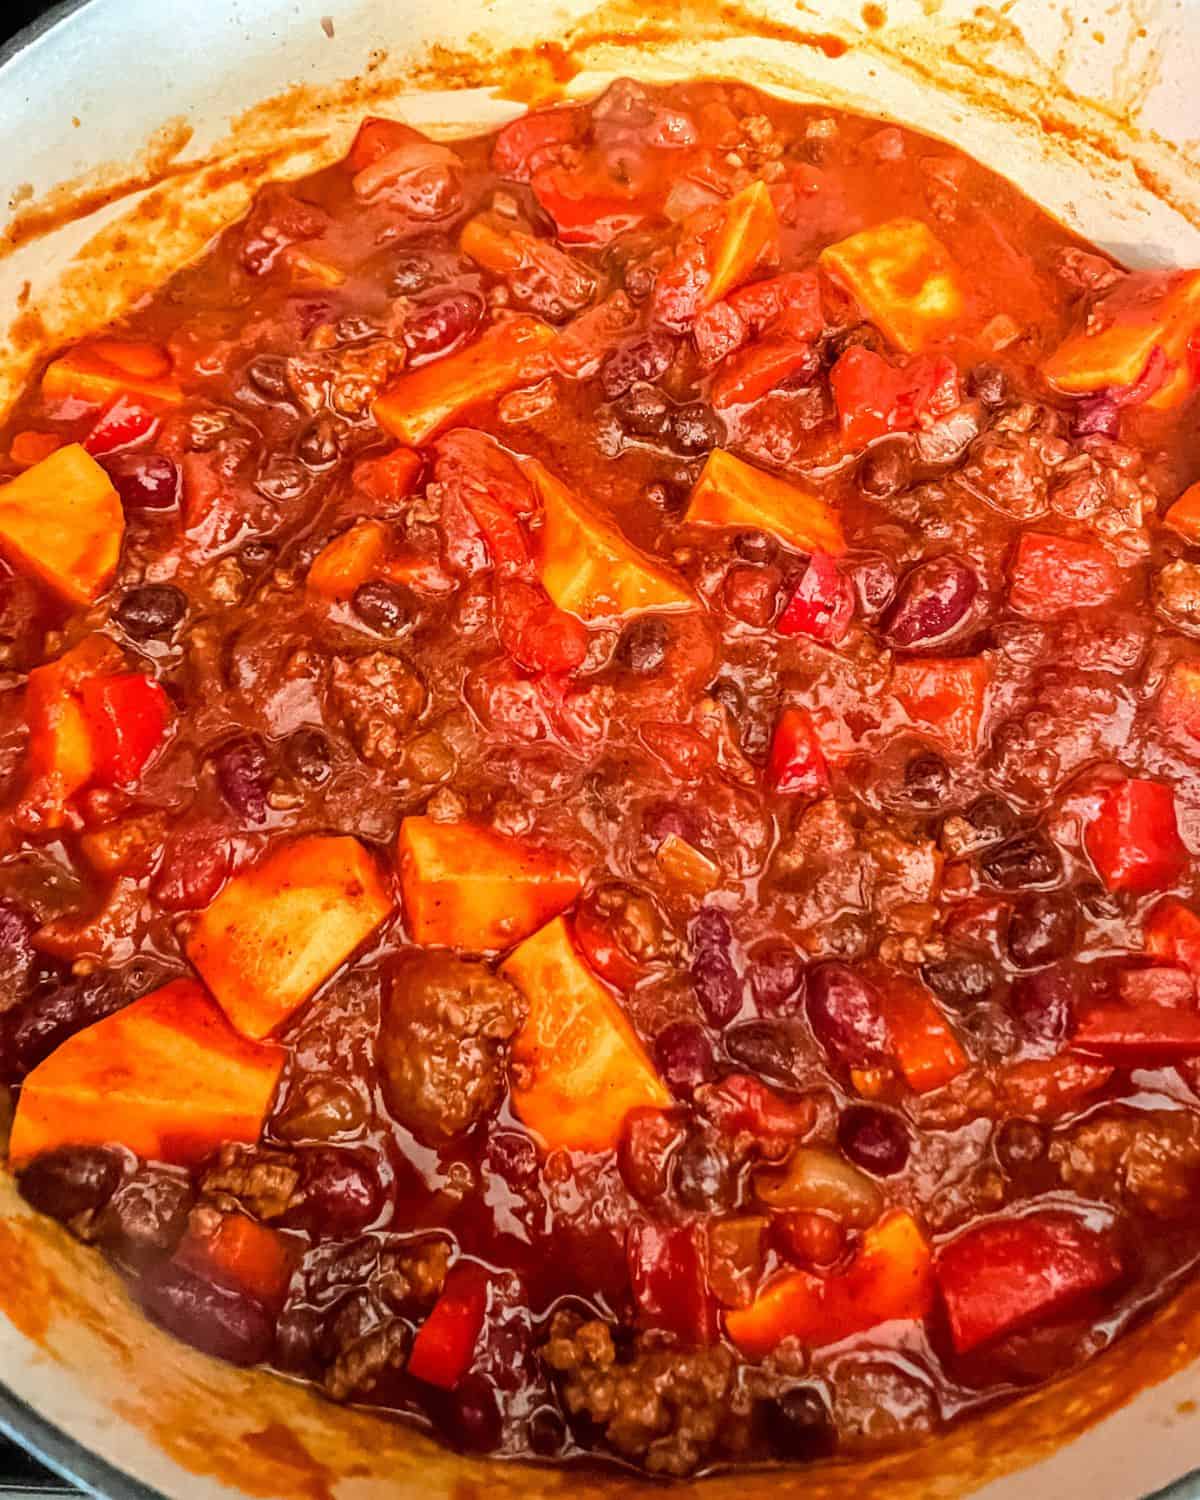 Tomato sauce, diced tomatoes, chopped sweet potatoes and beef broth added into the pot.